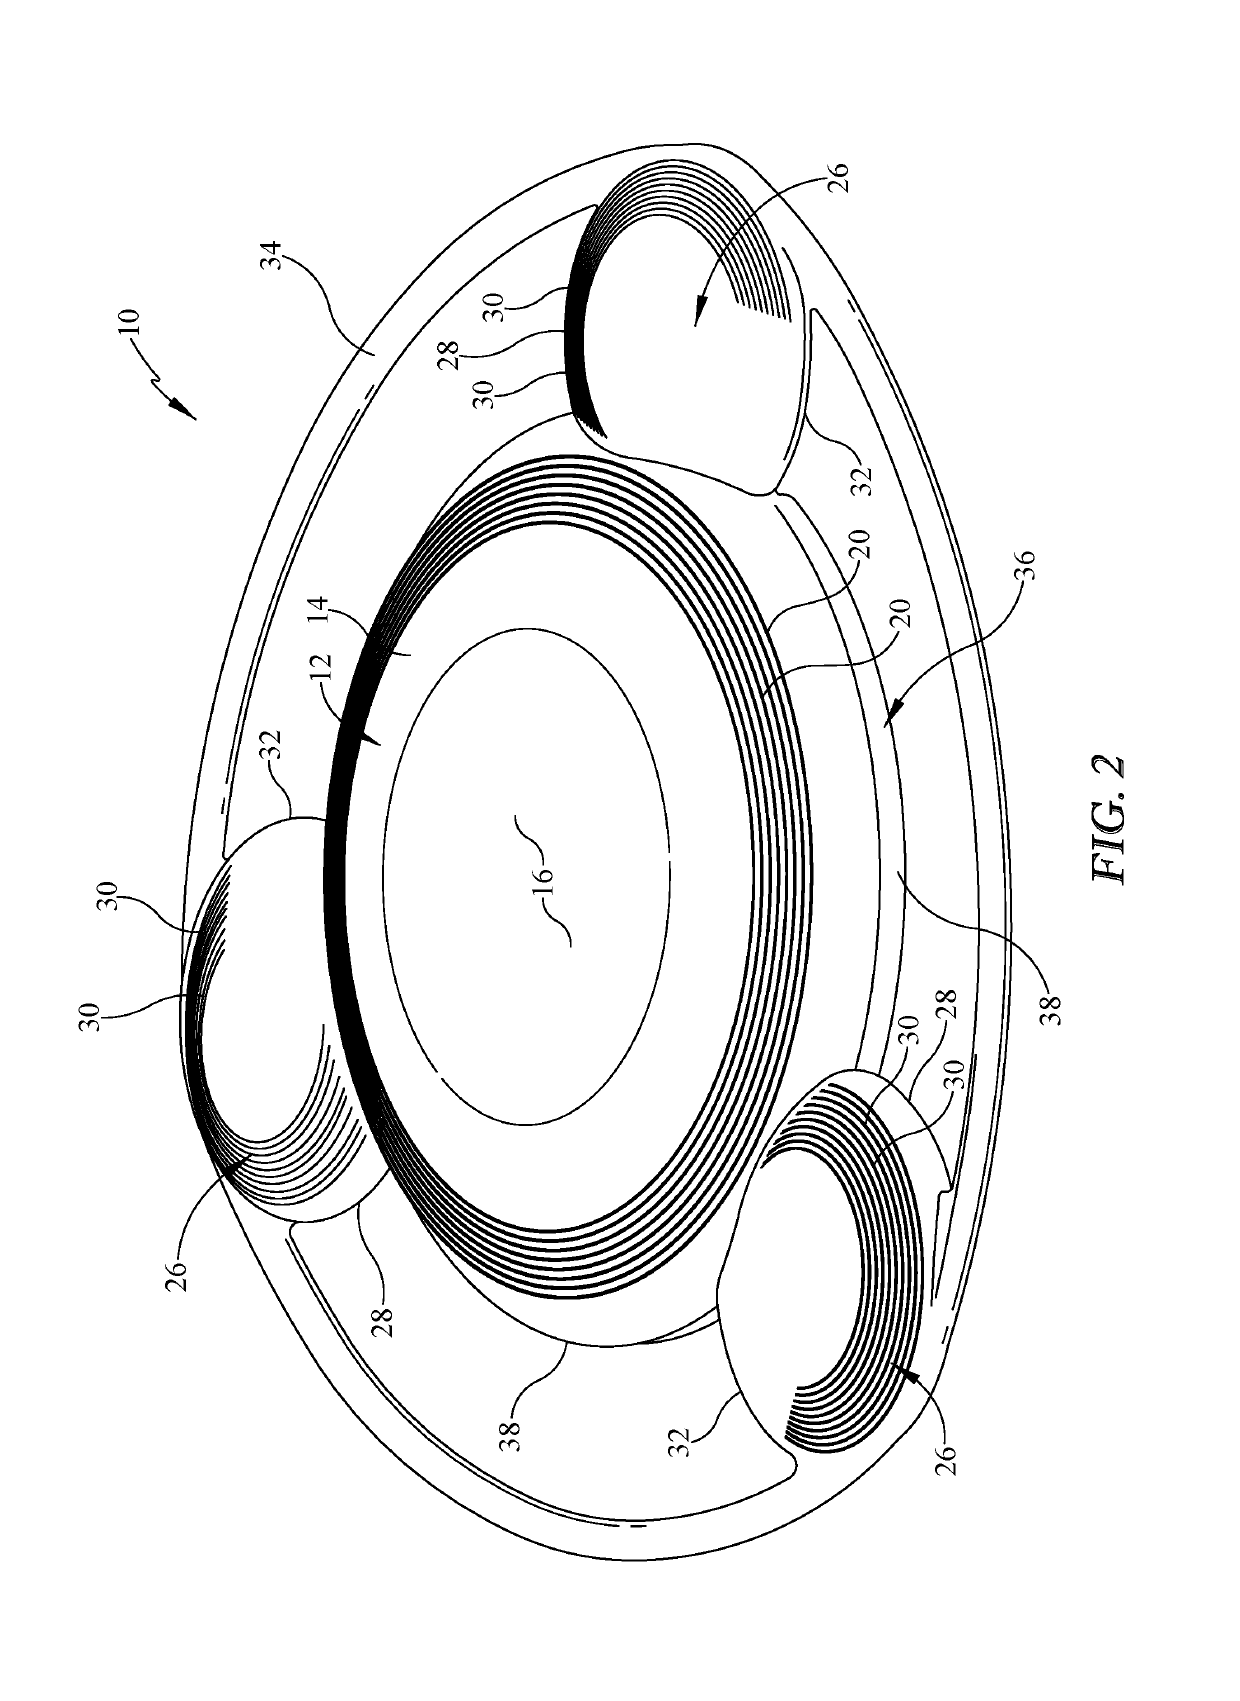 Flying disk with airfoils